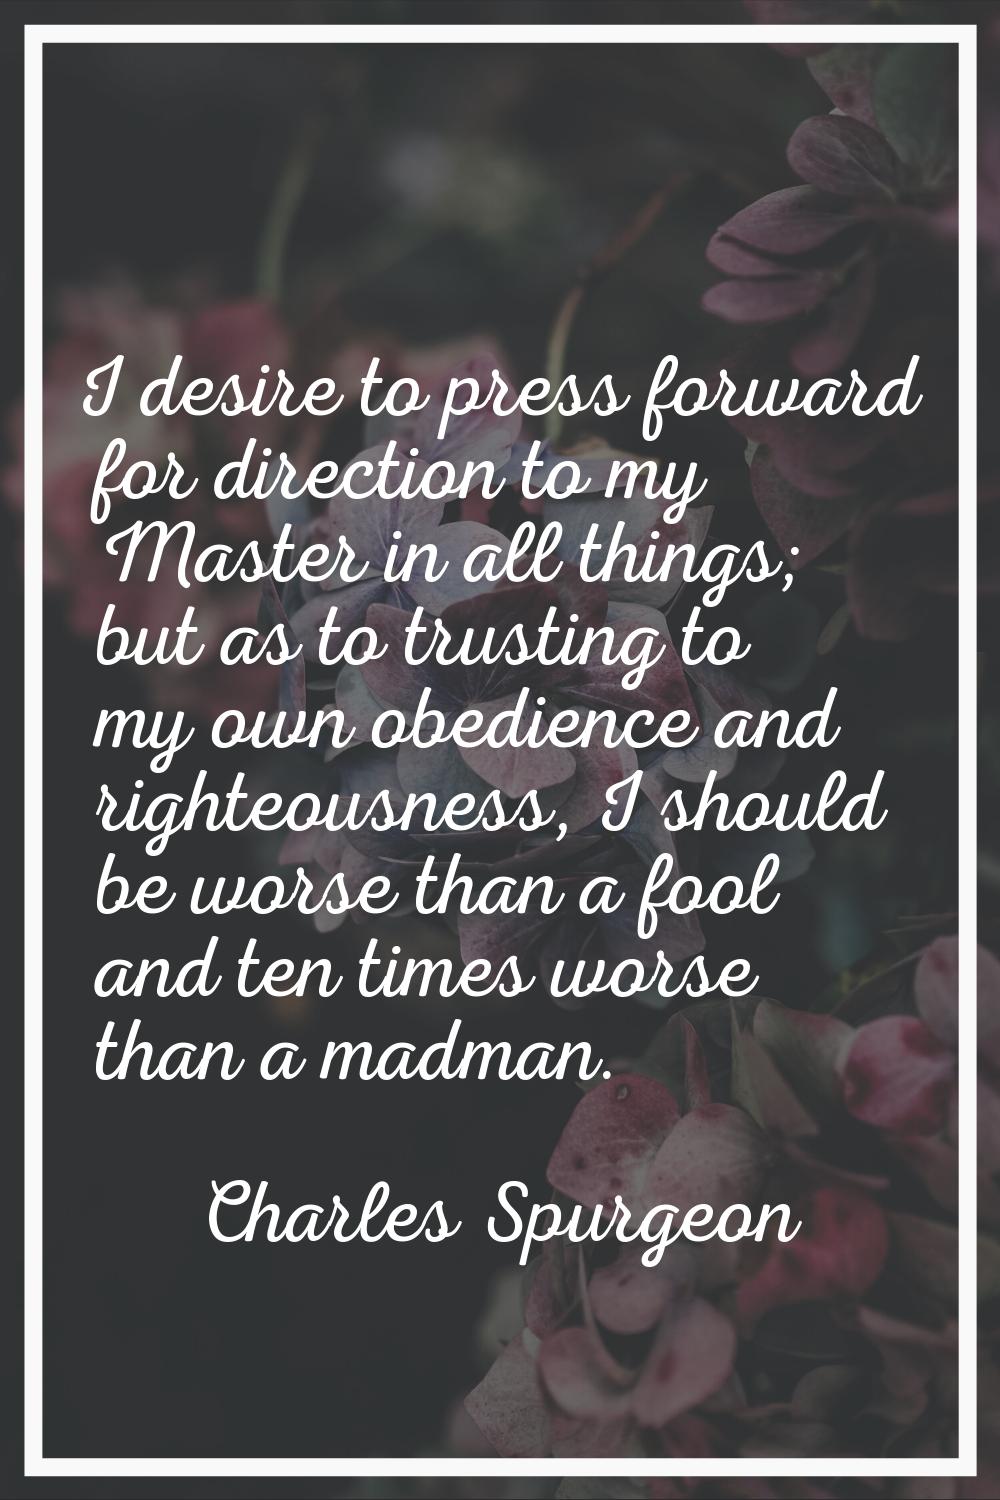 I desire to press forward for direction to my Master in all things; but as to trusting to my own ob